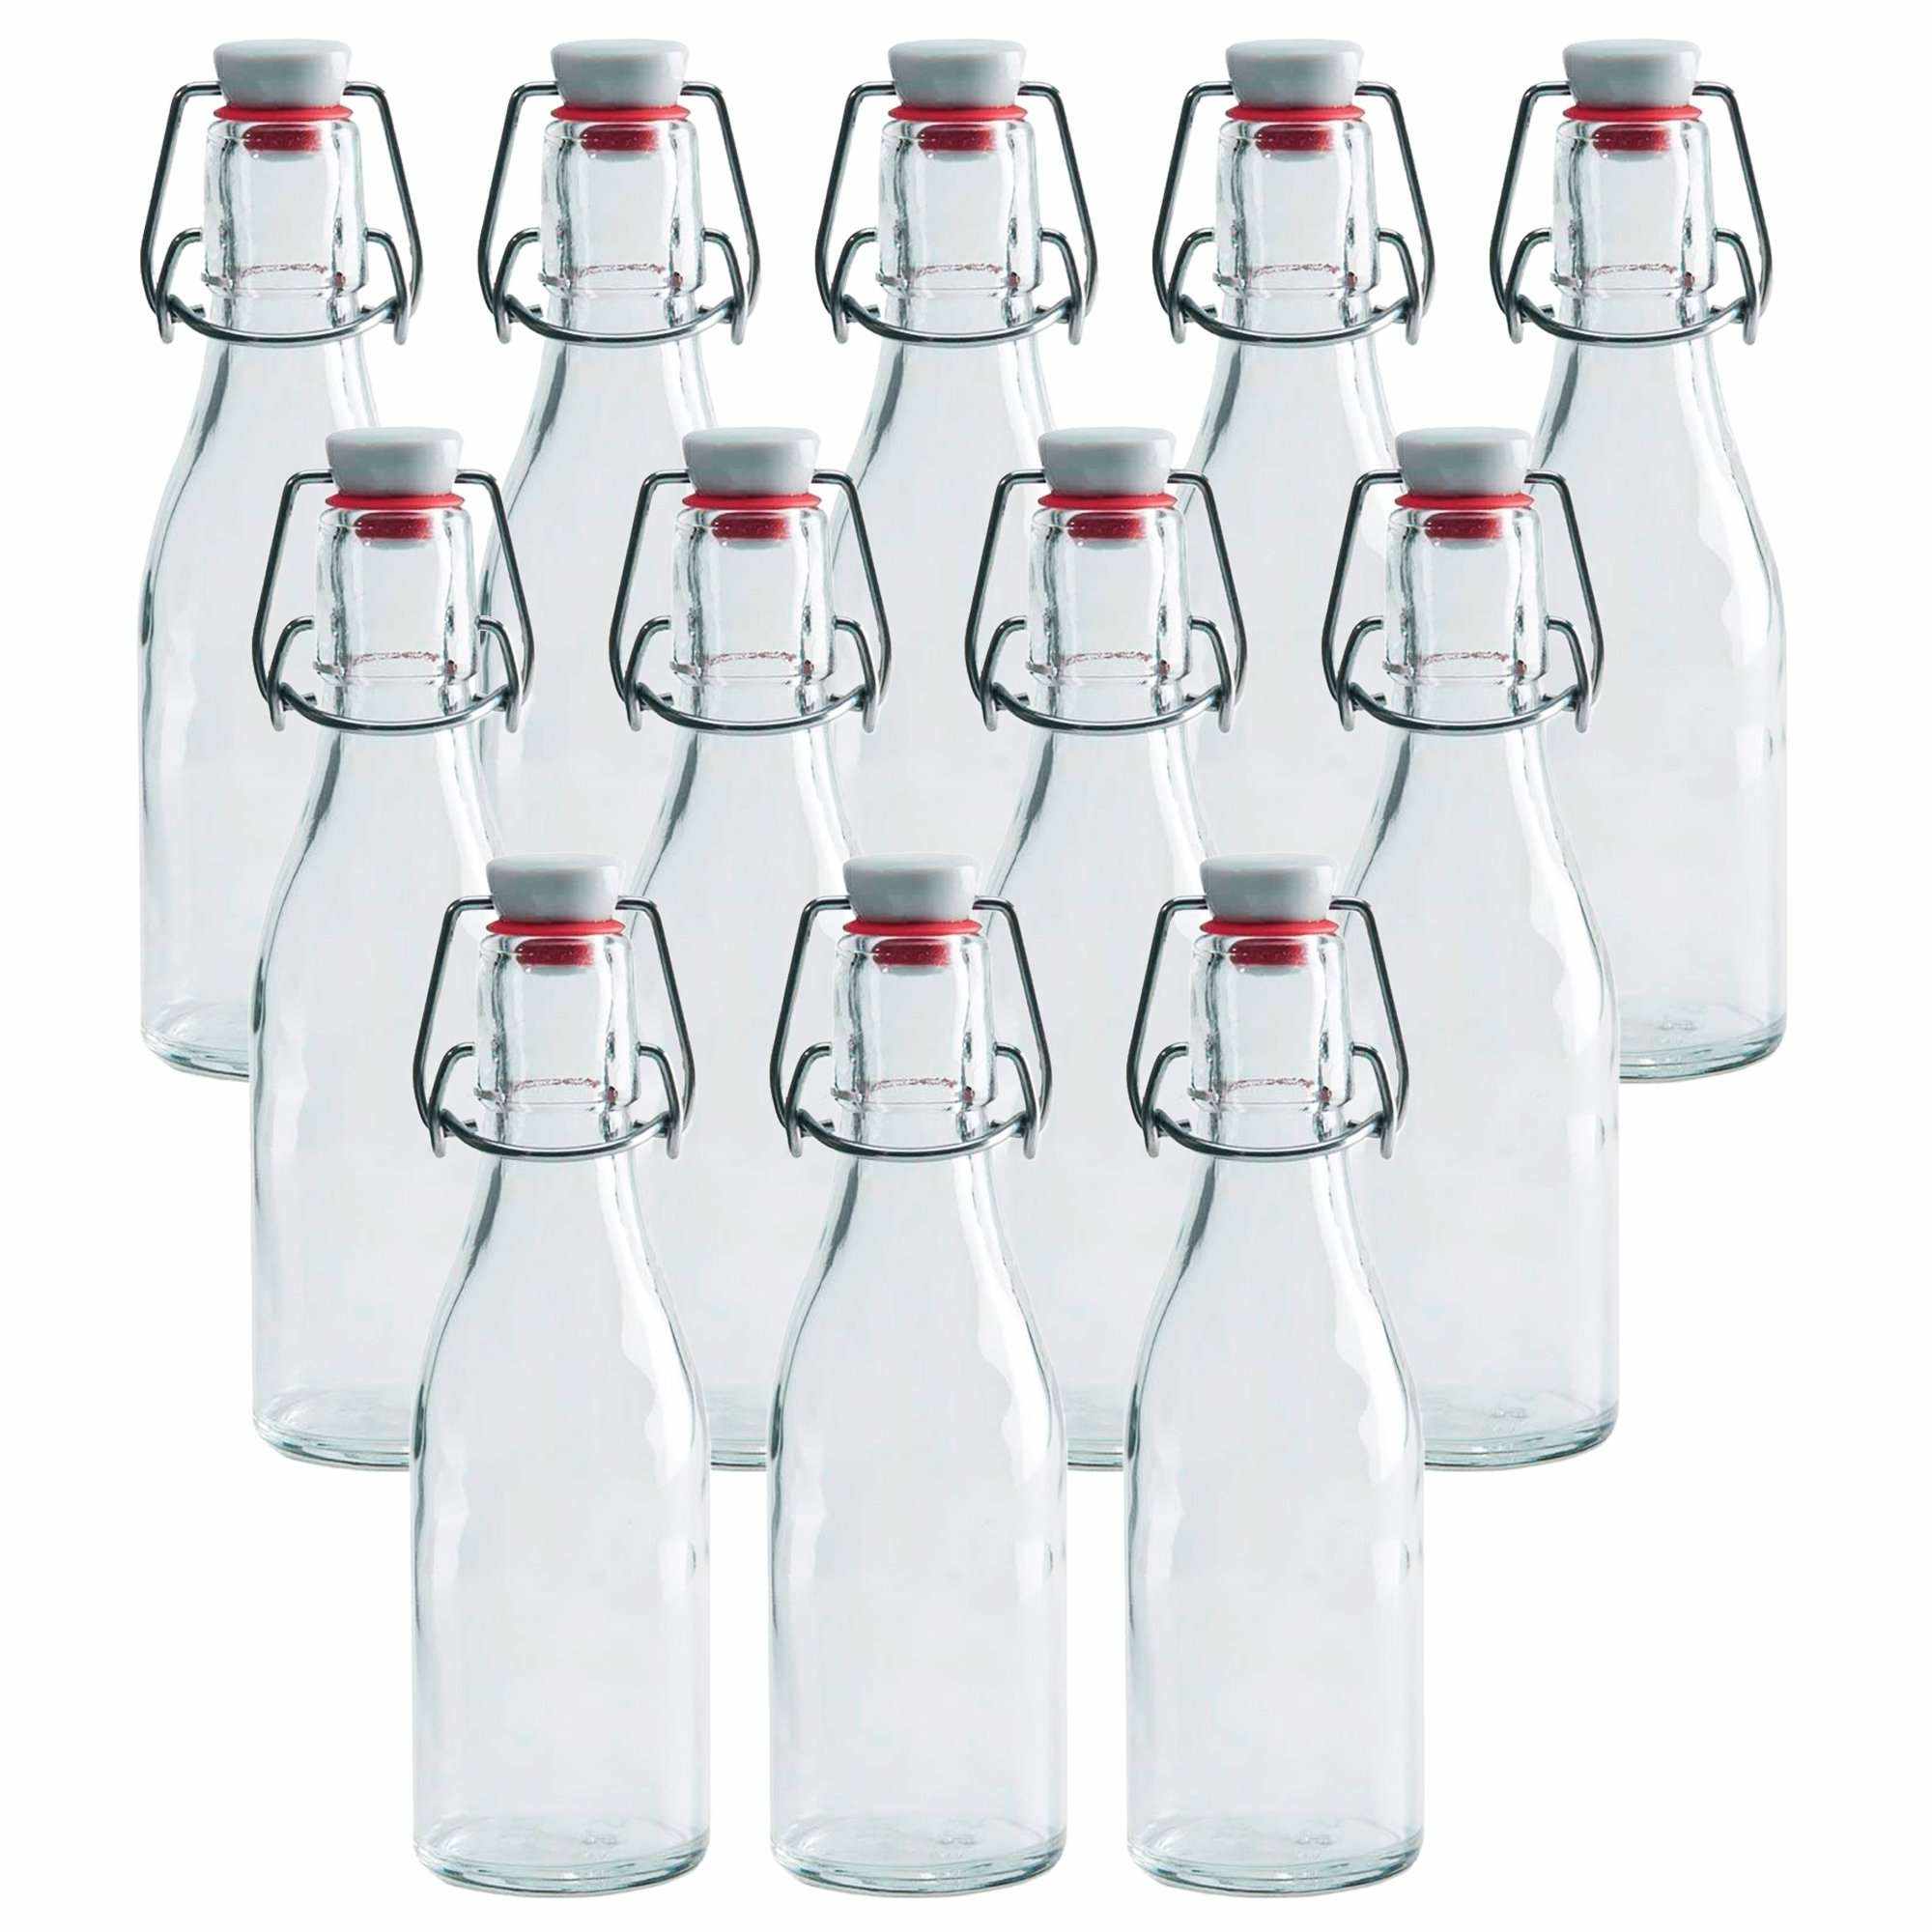 8.5 ounce swing top glass bottle with 12 bottles in image